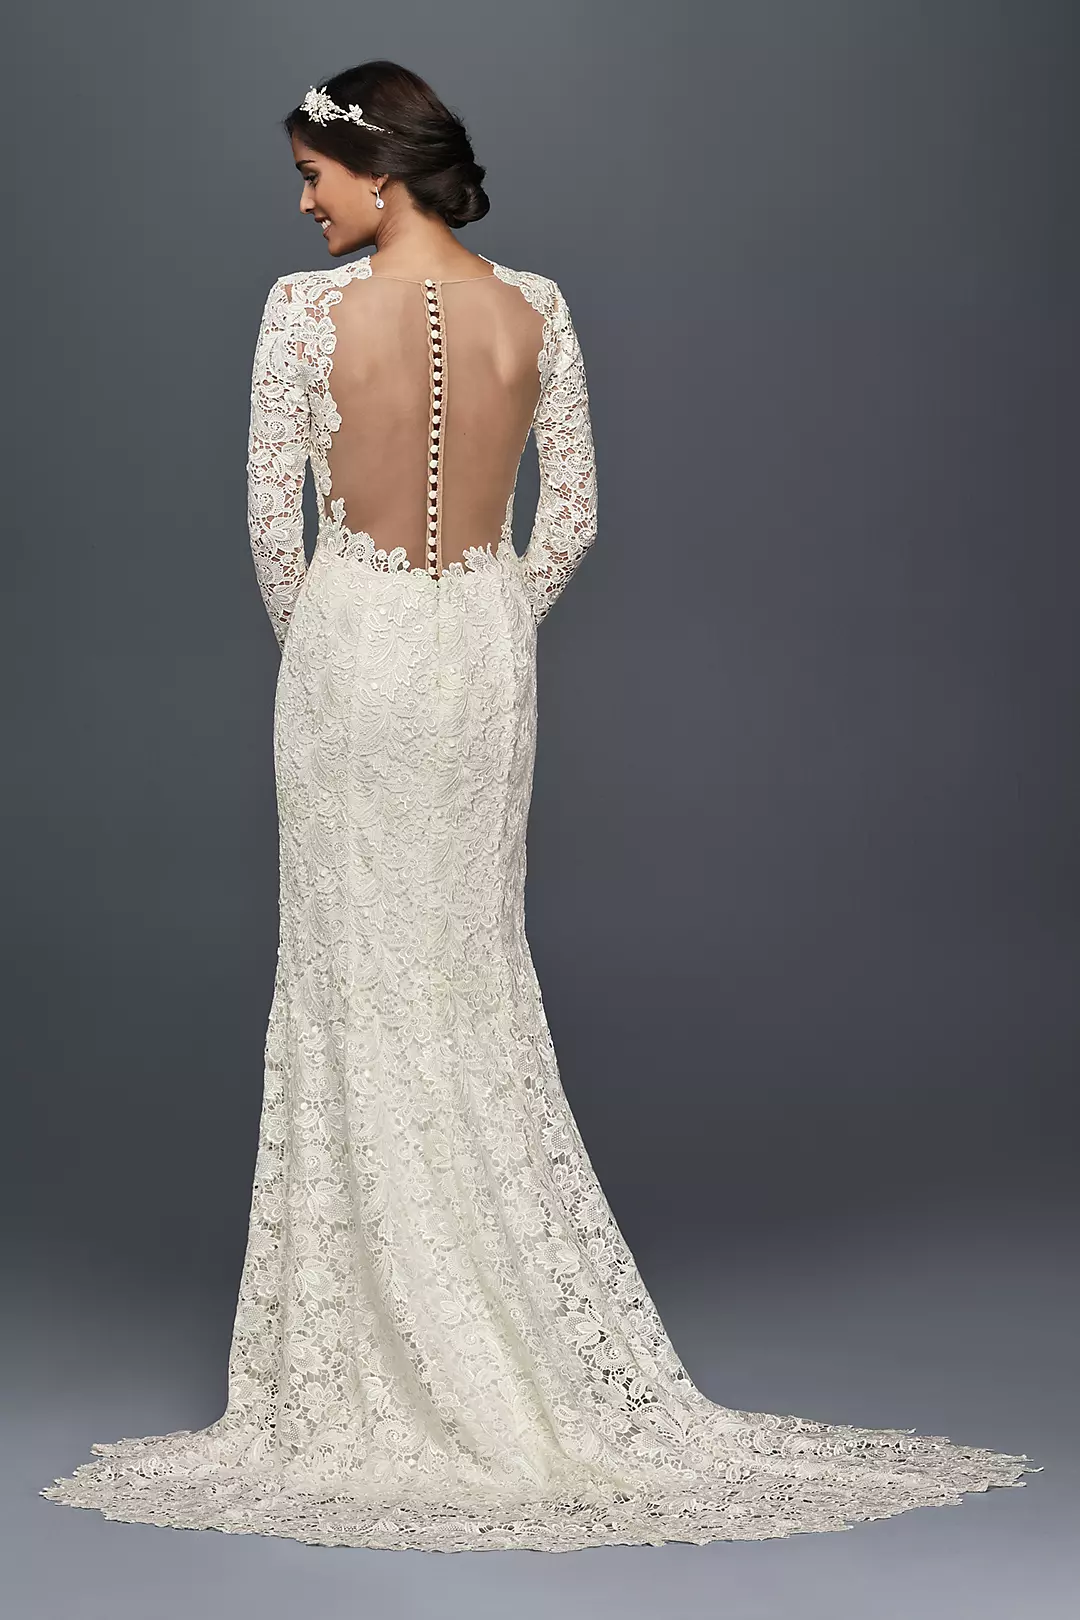 Long Sleeve Lace Wedding Dress with Open Back | David's Bridal